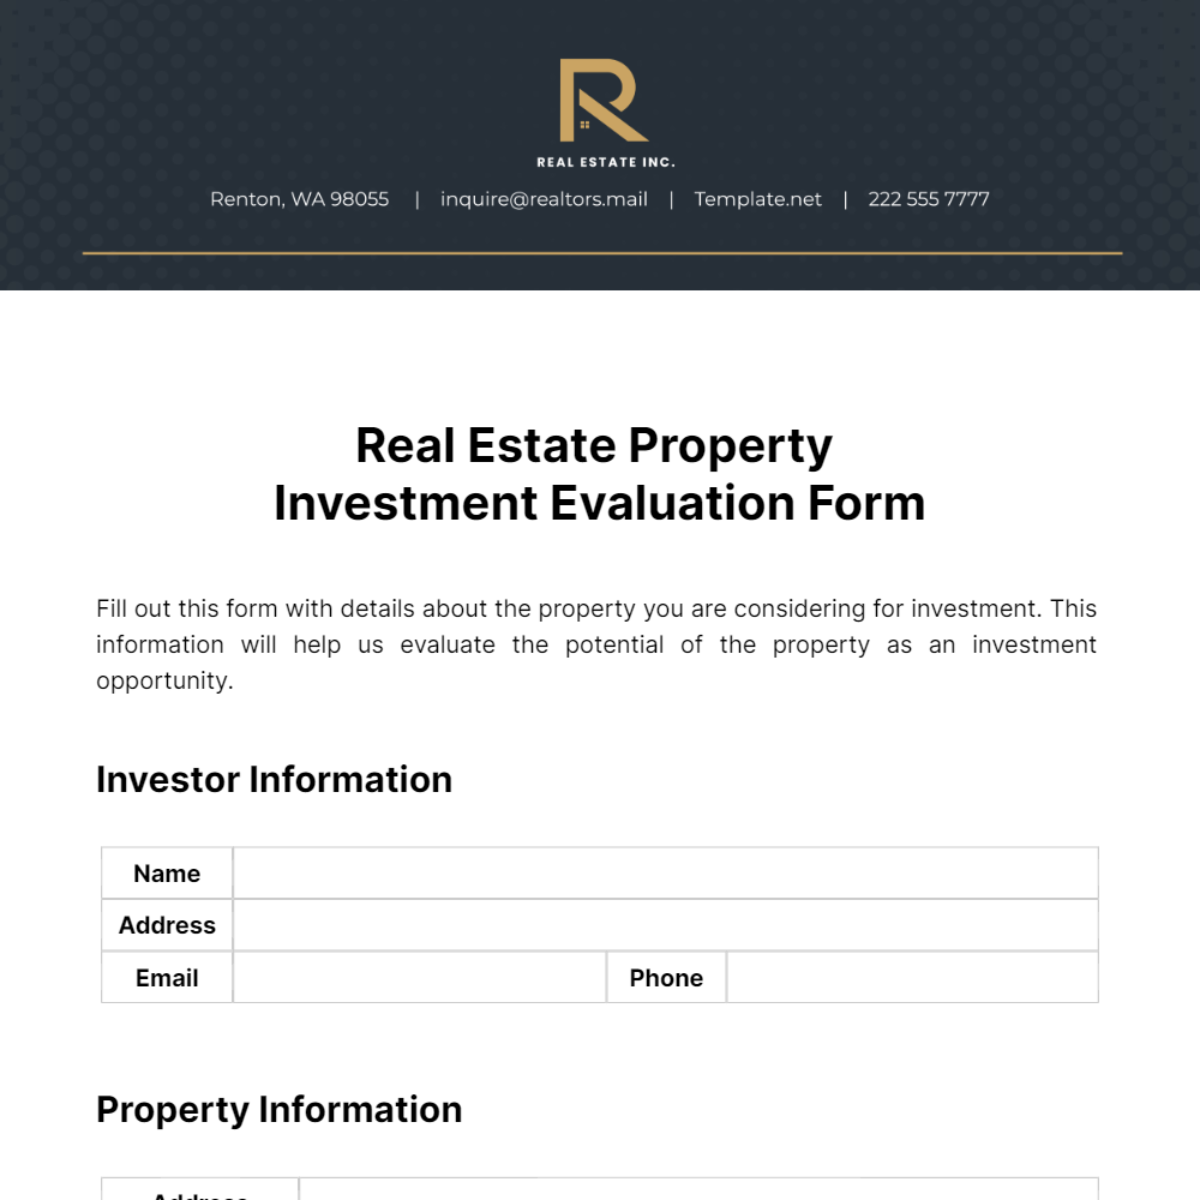 Real Estate Property Investment Evaluation Form Template